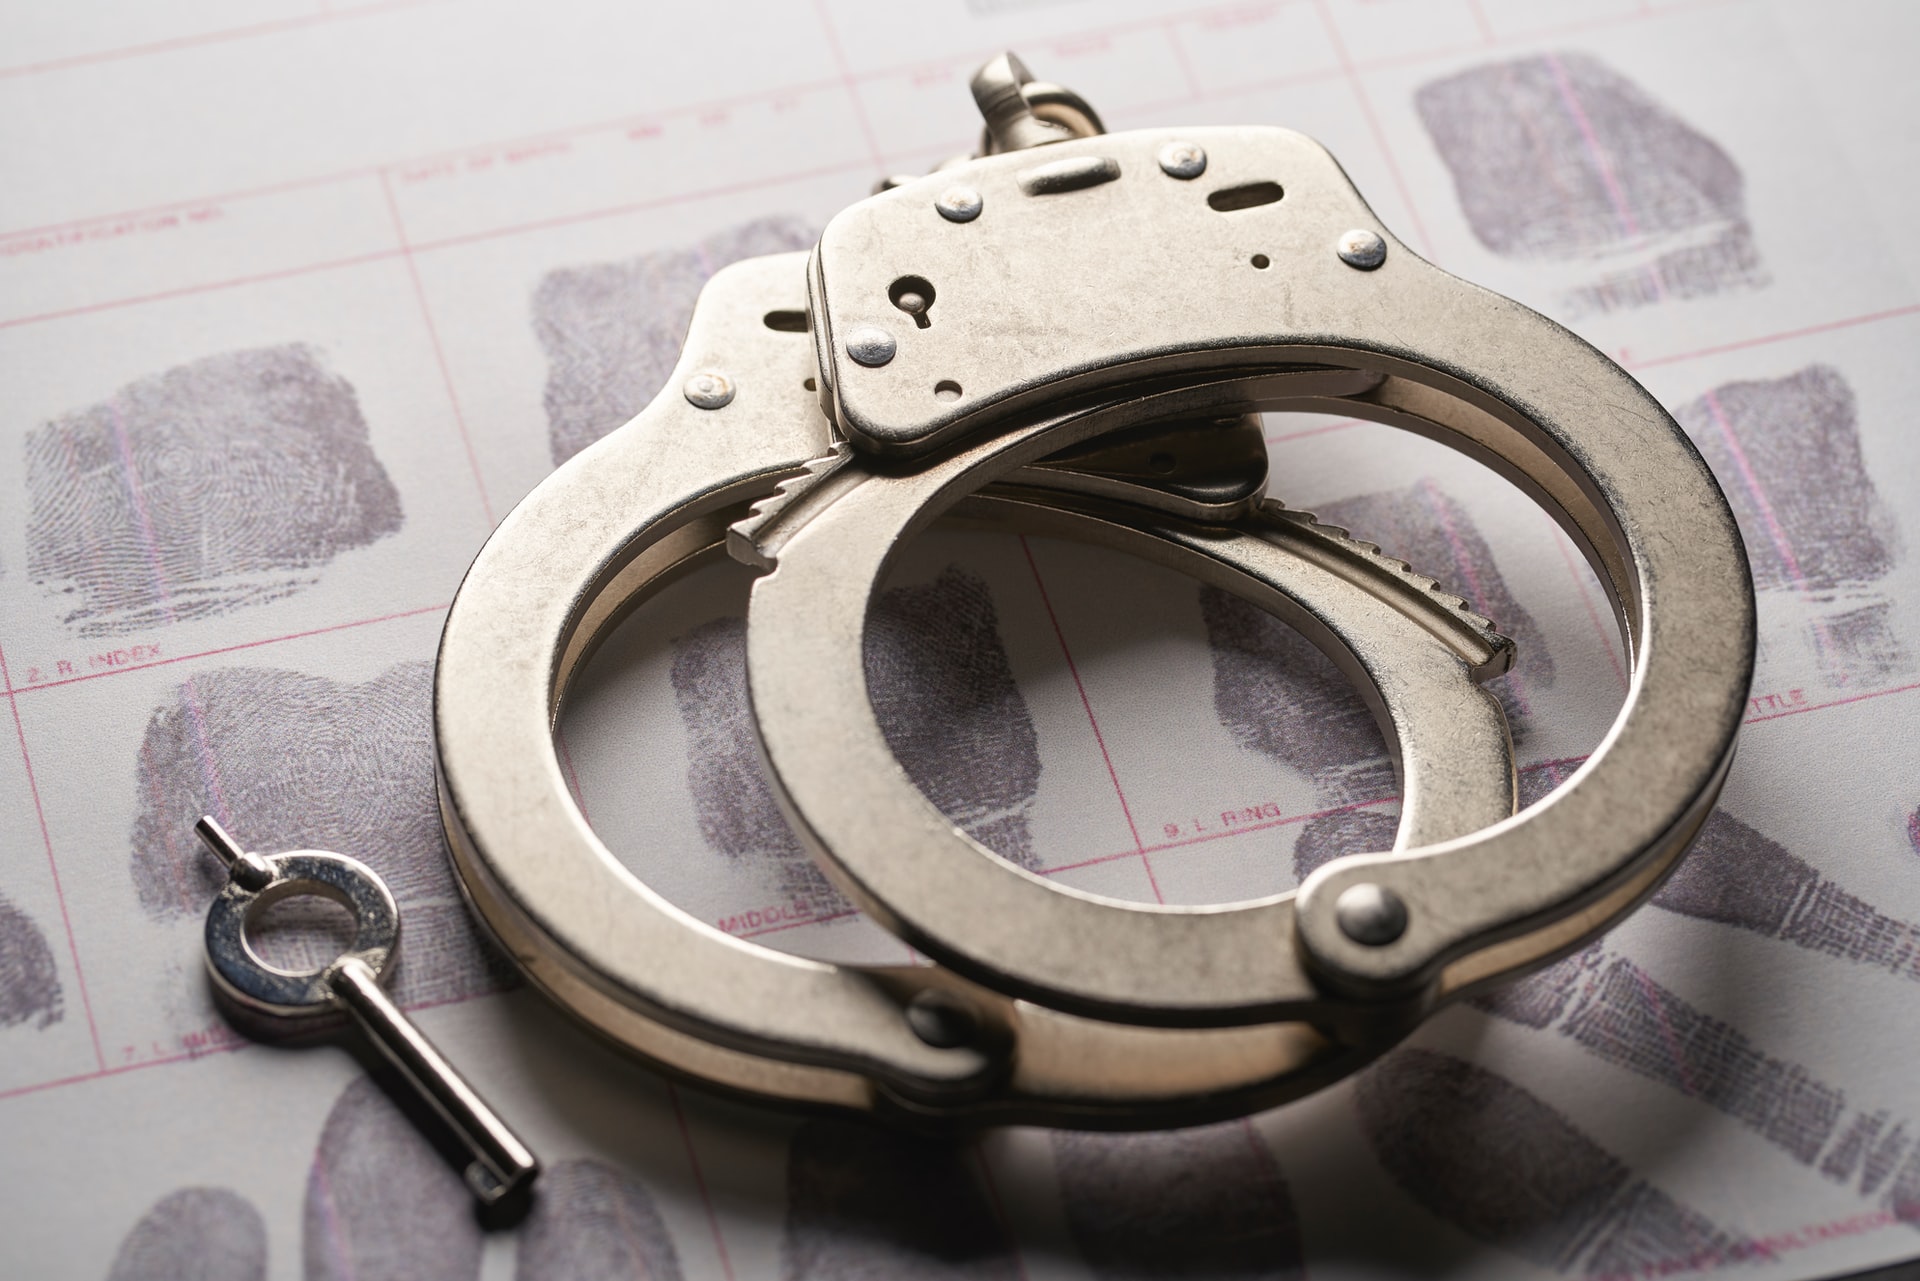 ROP arrests two people for theft